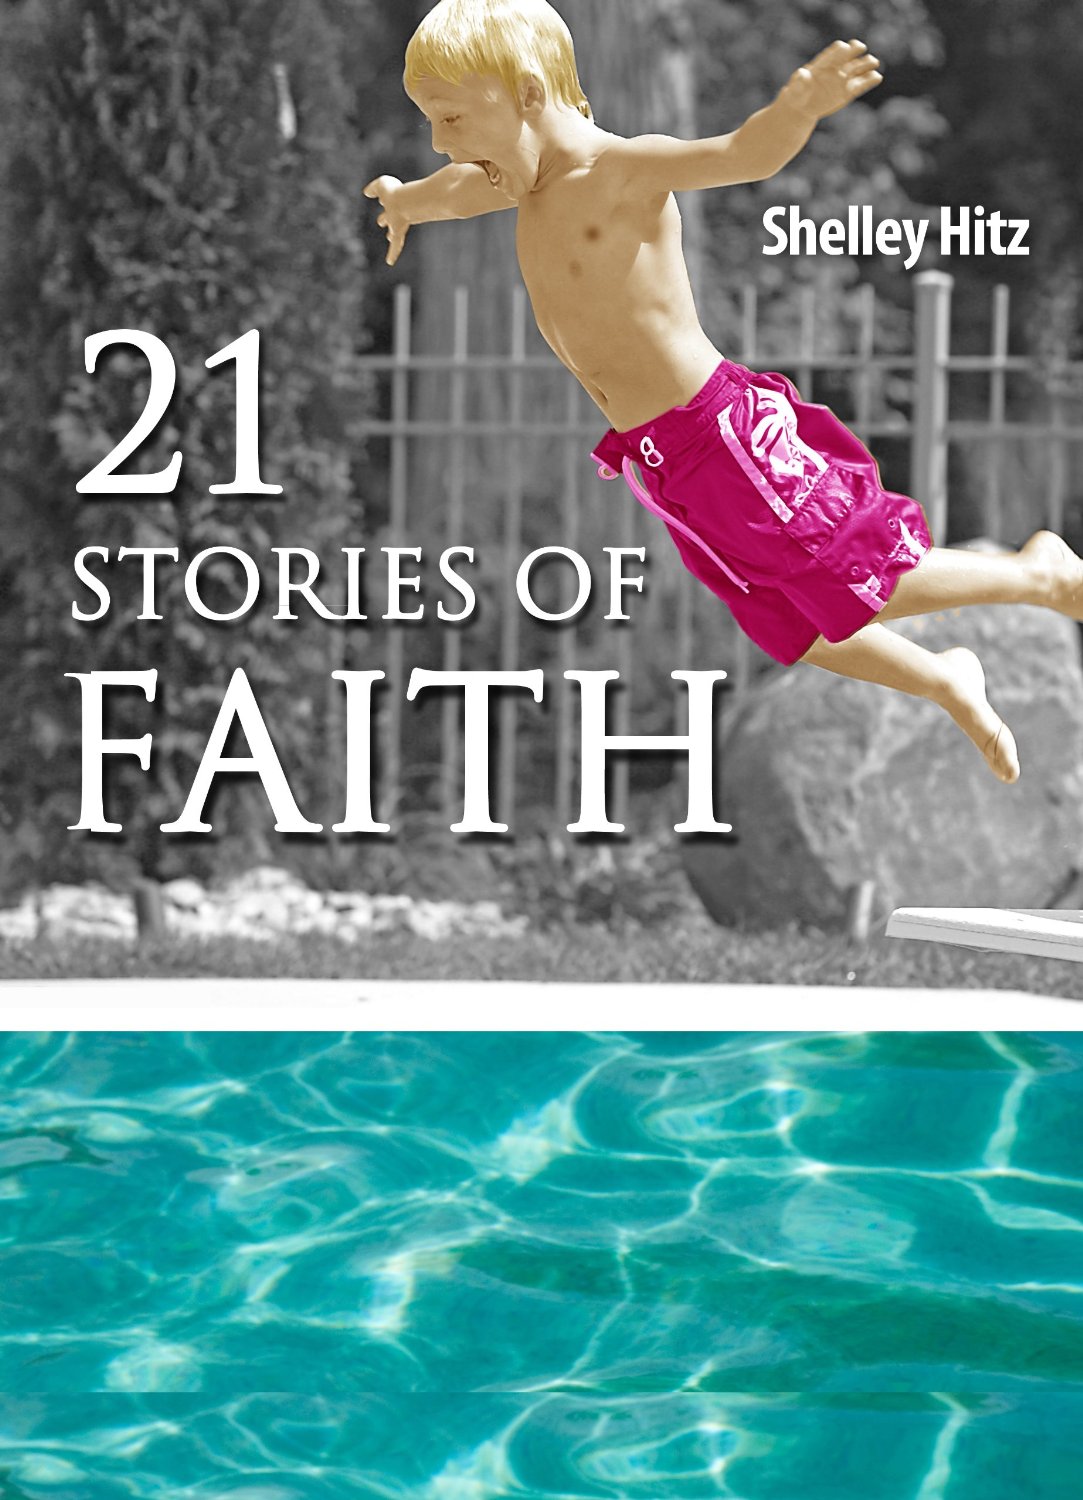 21 Stories of Faith: Real People, Real Stories, Real Faith (A Life of Faith) by Shelley Hitz